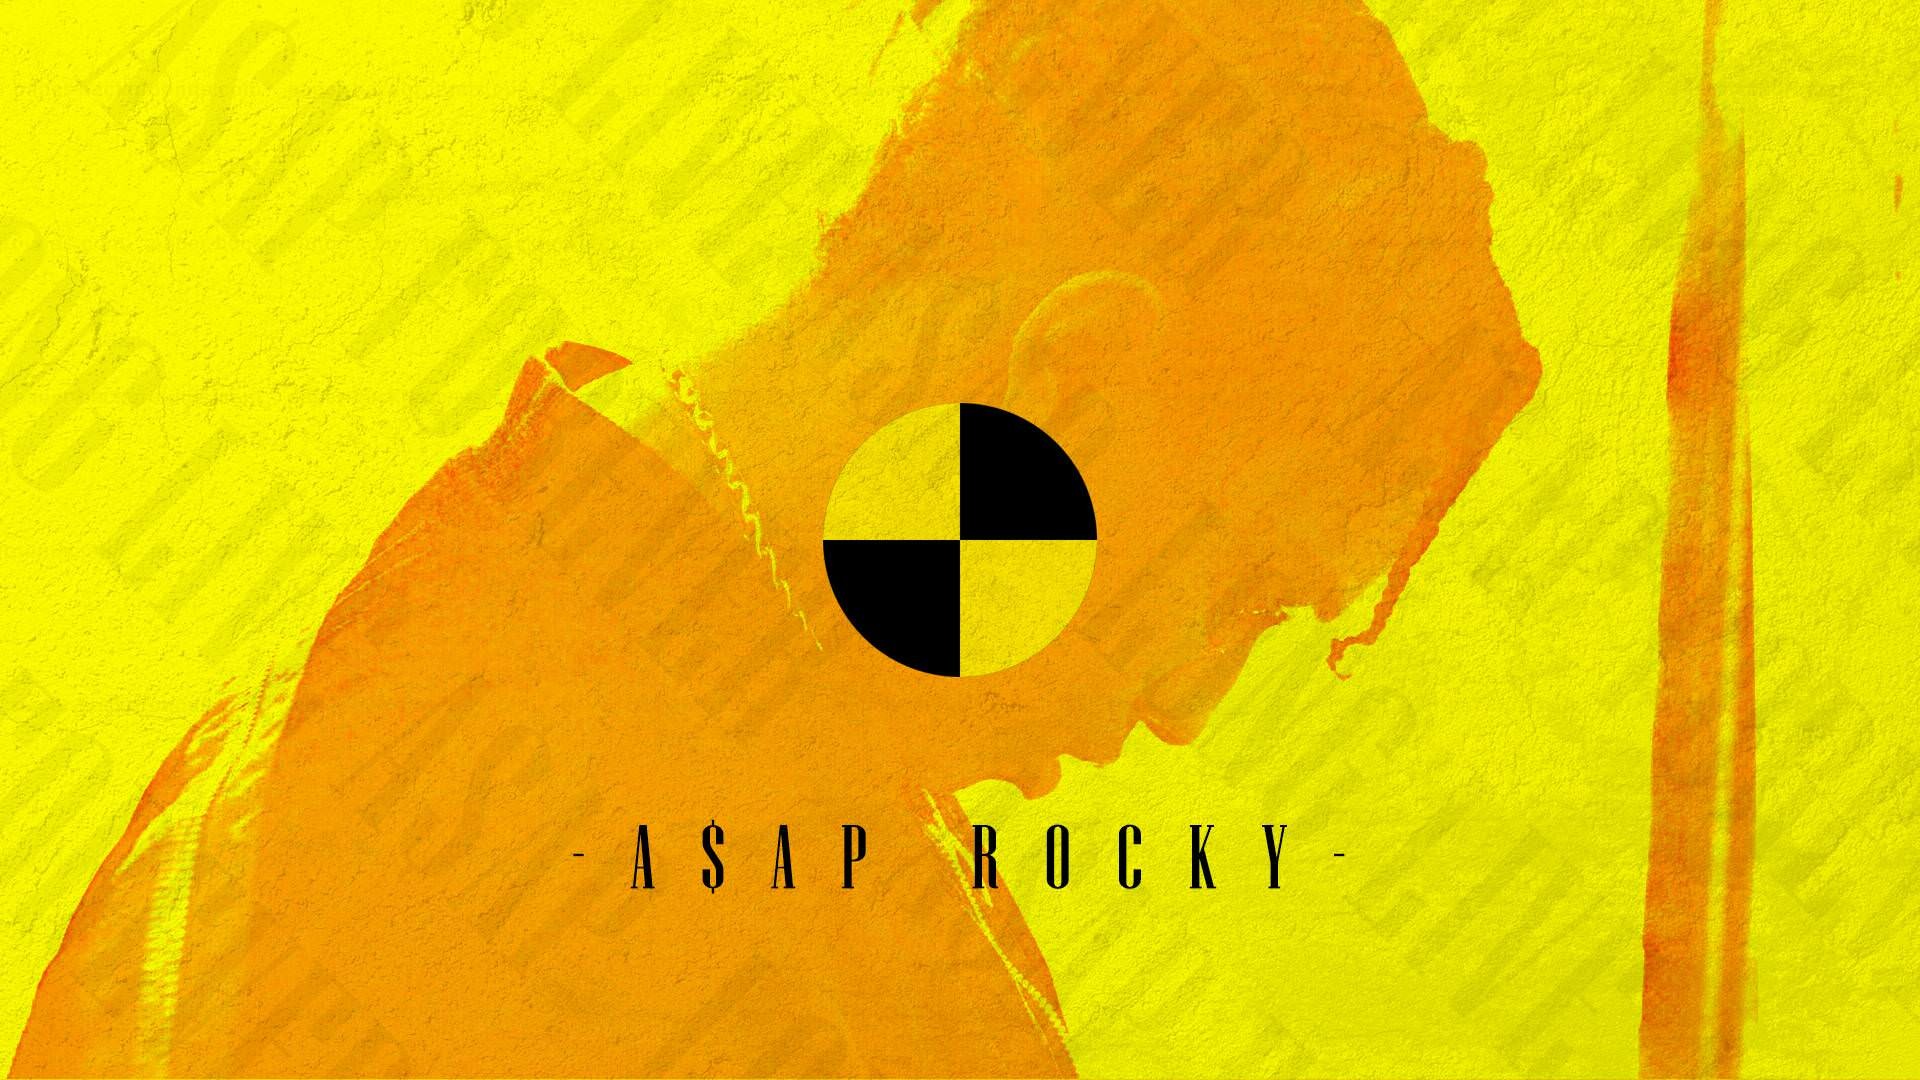 Made A Quick A$ap Rocky Background For Users, What - Asap Rocky Testing Wallpaper Desktop - HD Wallpaper 